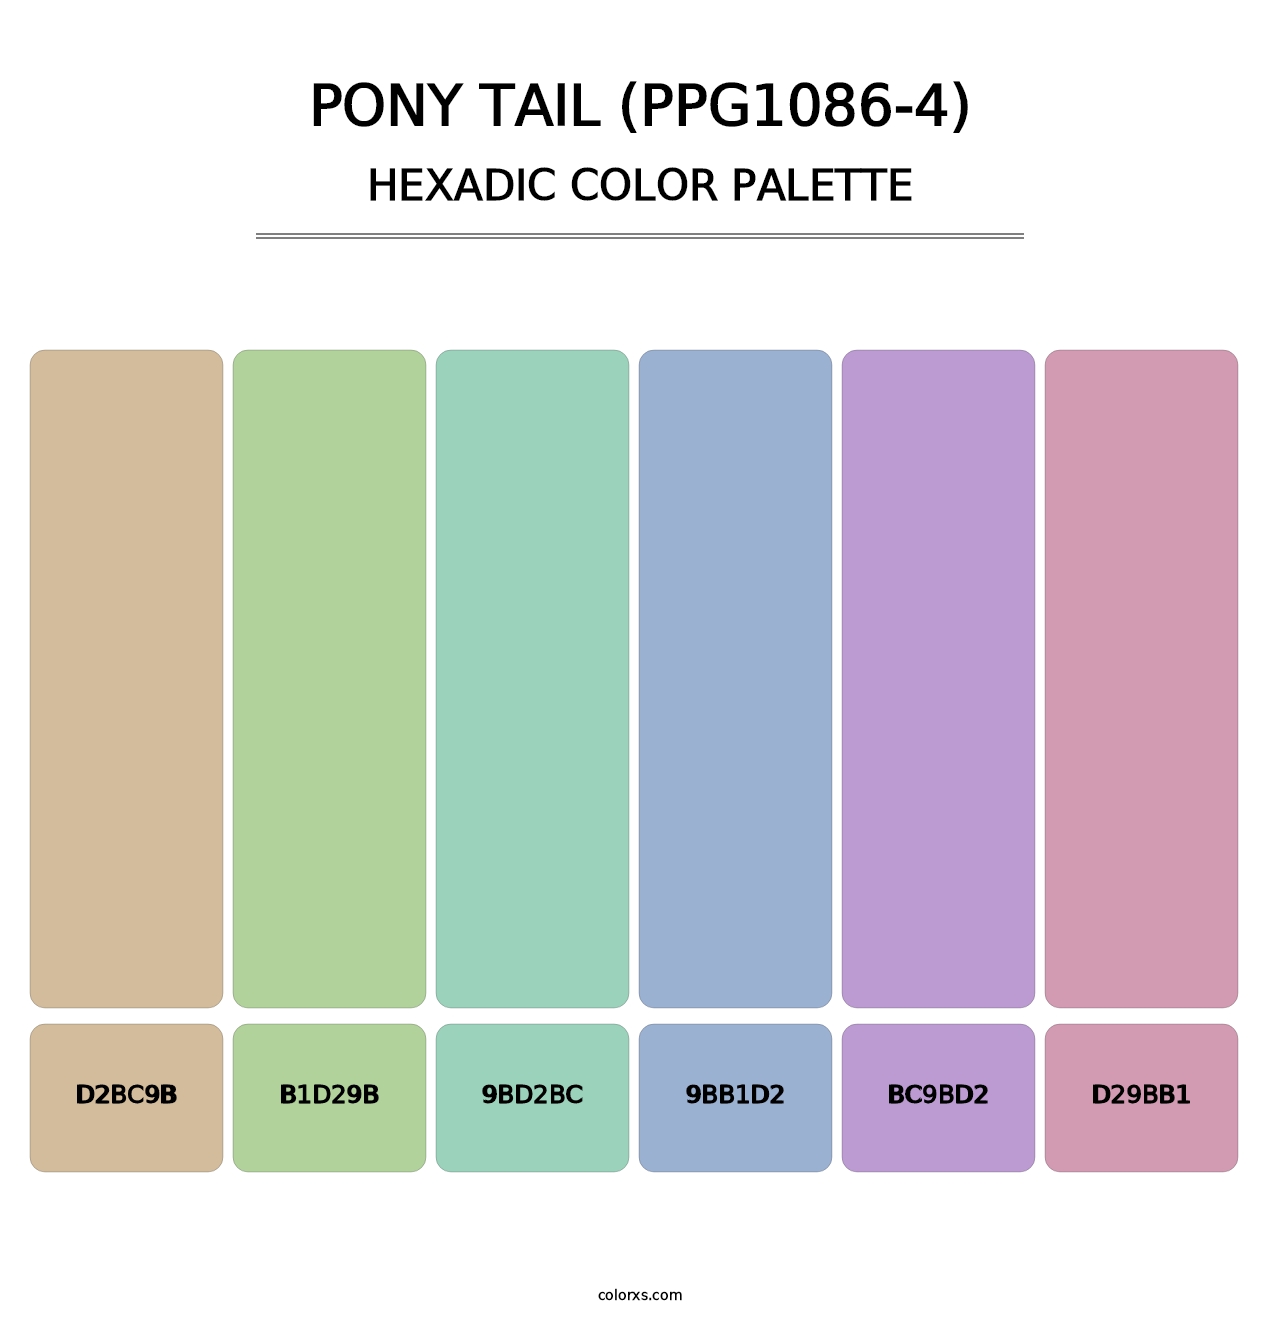 Pony Tail (PPG1086-4) - Hexadic Color Palette